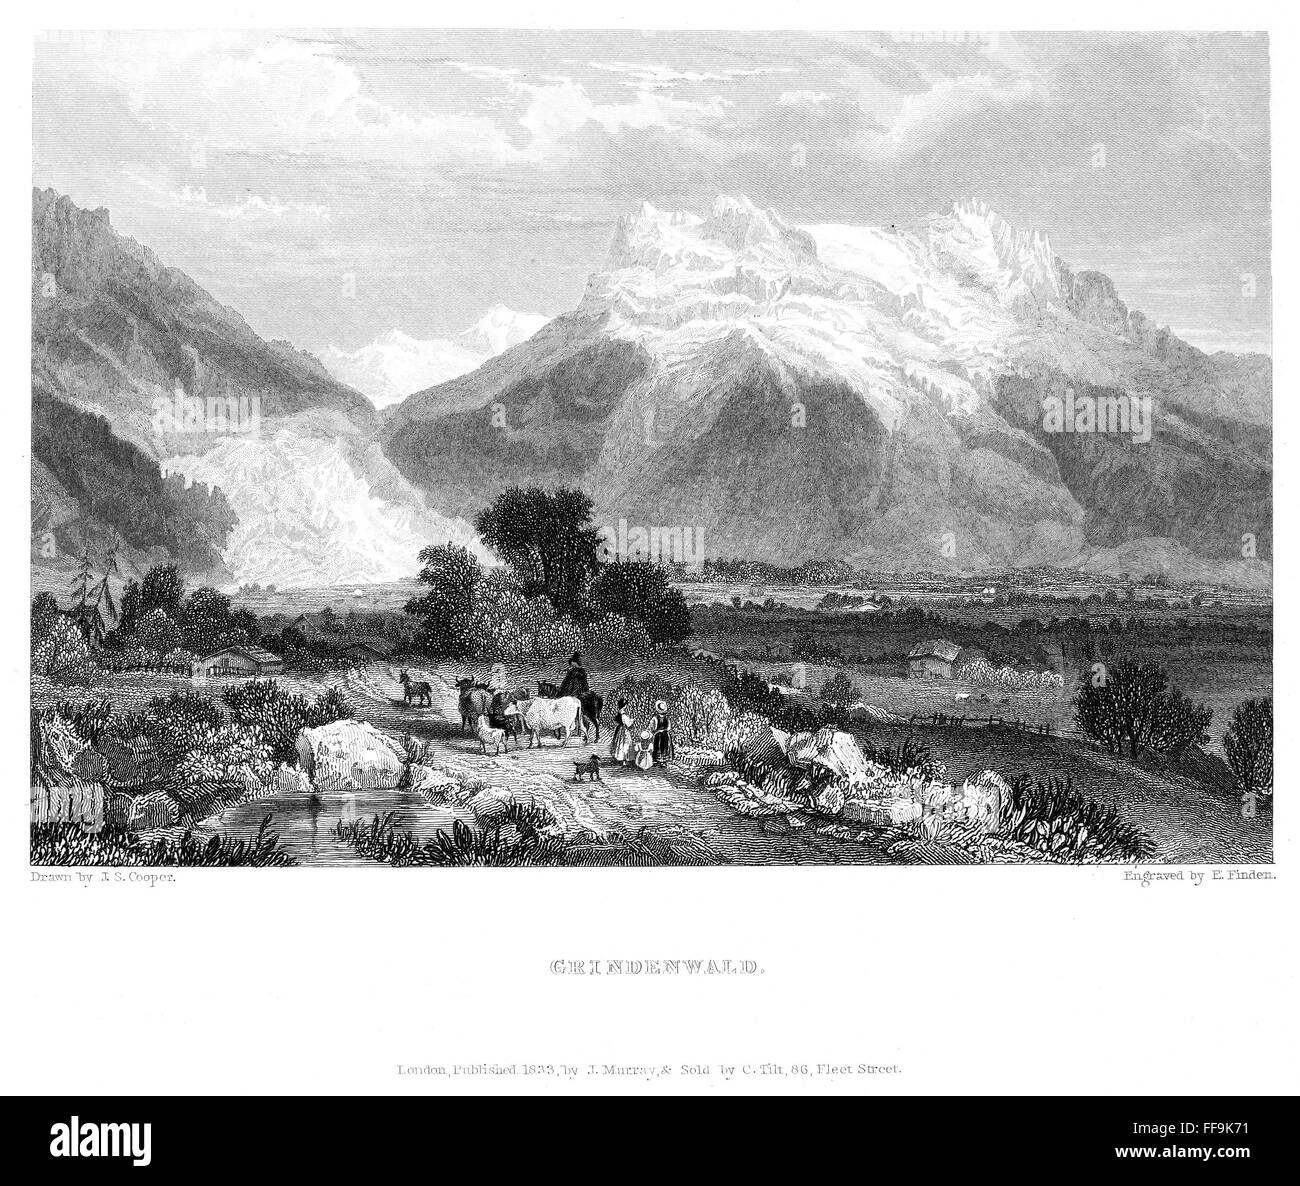 SWITZERLAND: GRINDENWALD. /nSteel engraving, English, 1833, by Edward Finden after a drawing by J.S. Cooper. Stock Photo